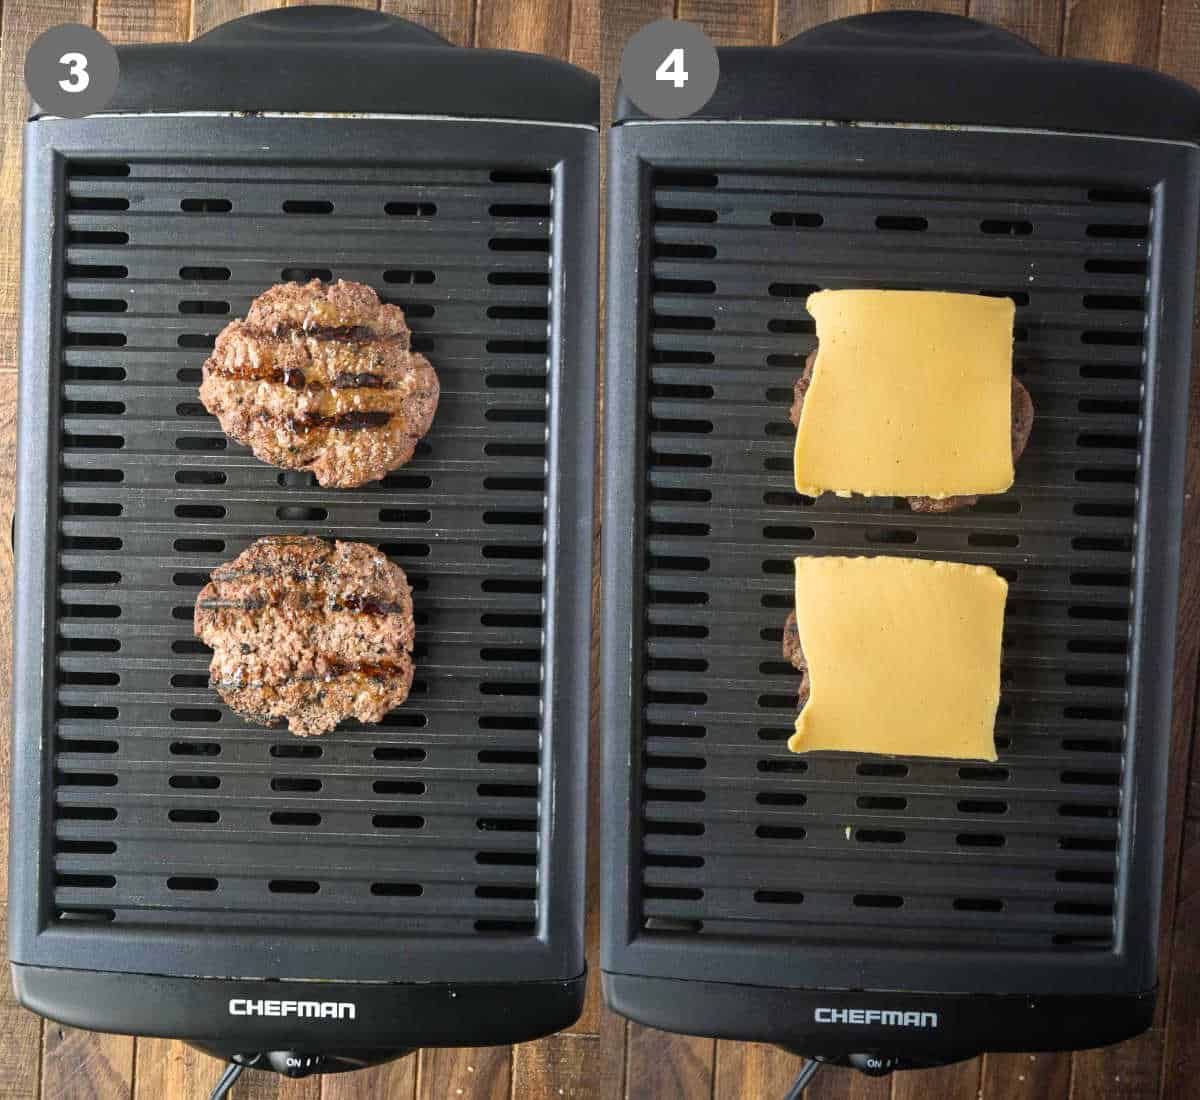 Burger patty cooked on a grill the cheese slices added on top.